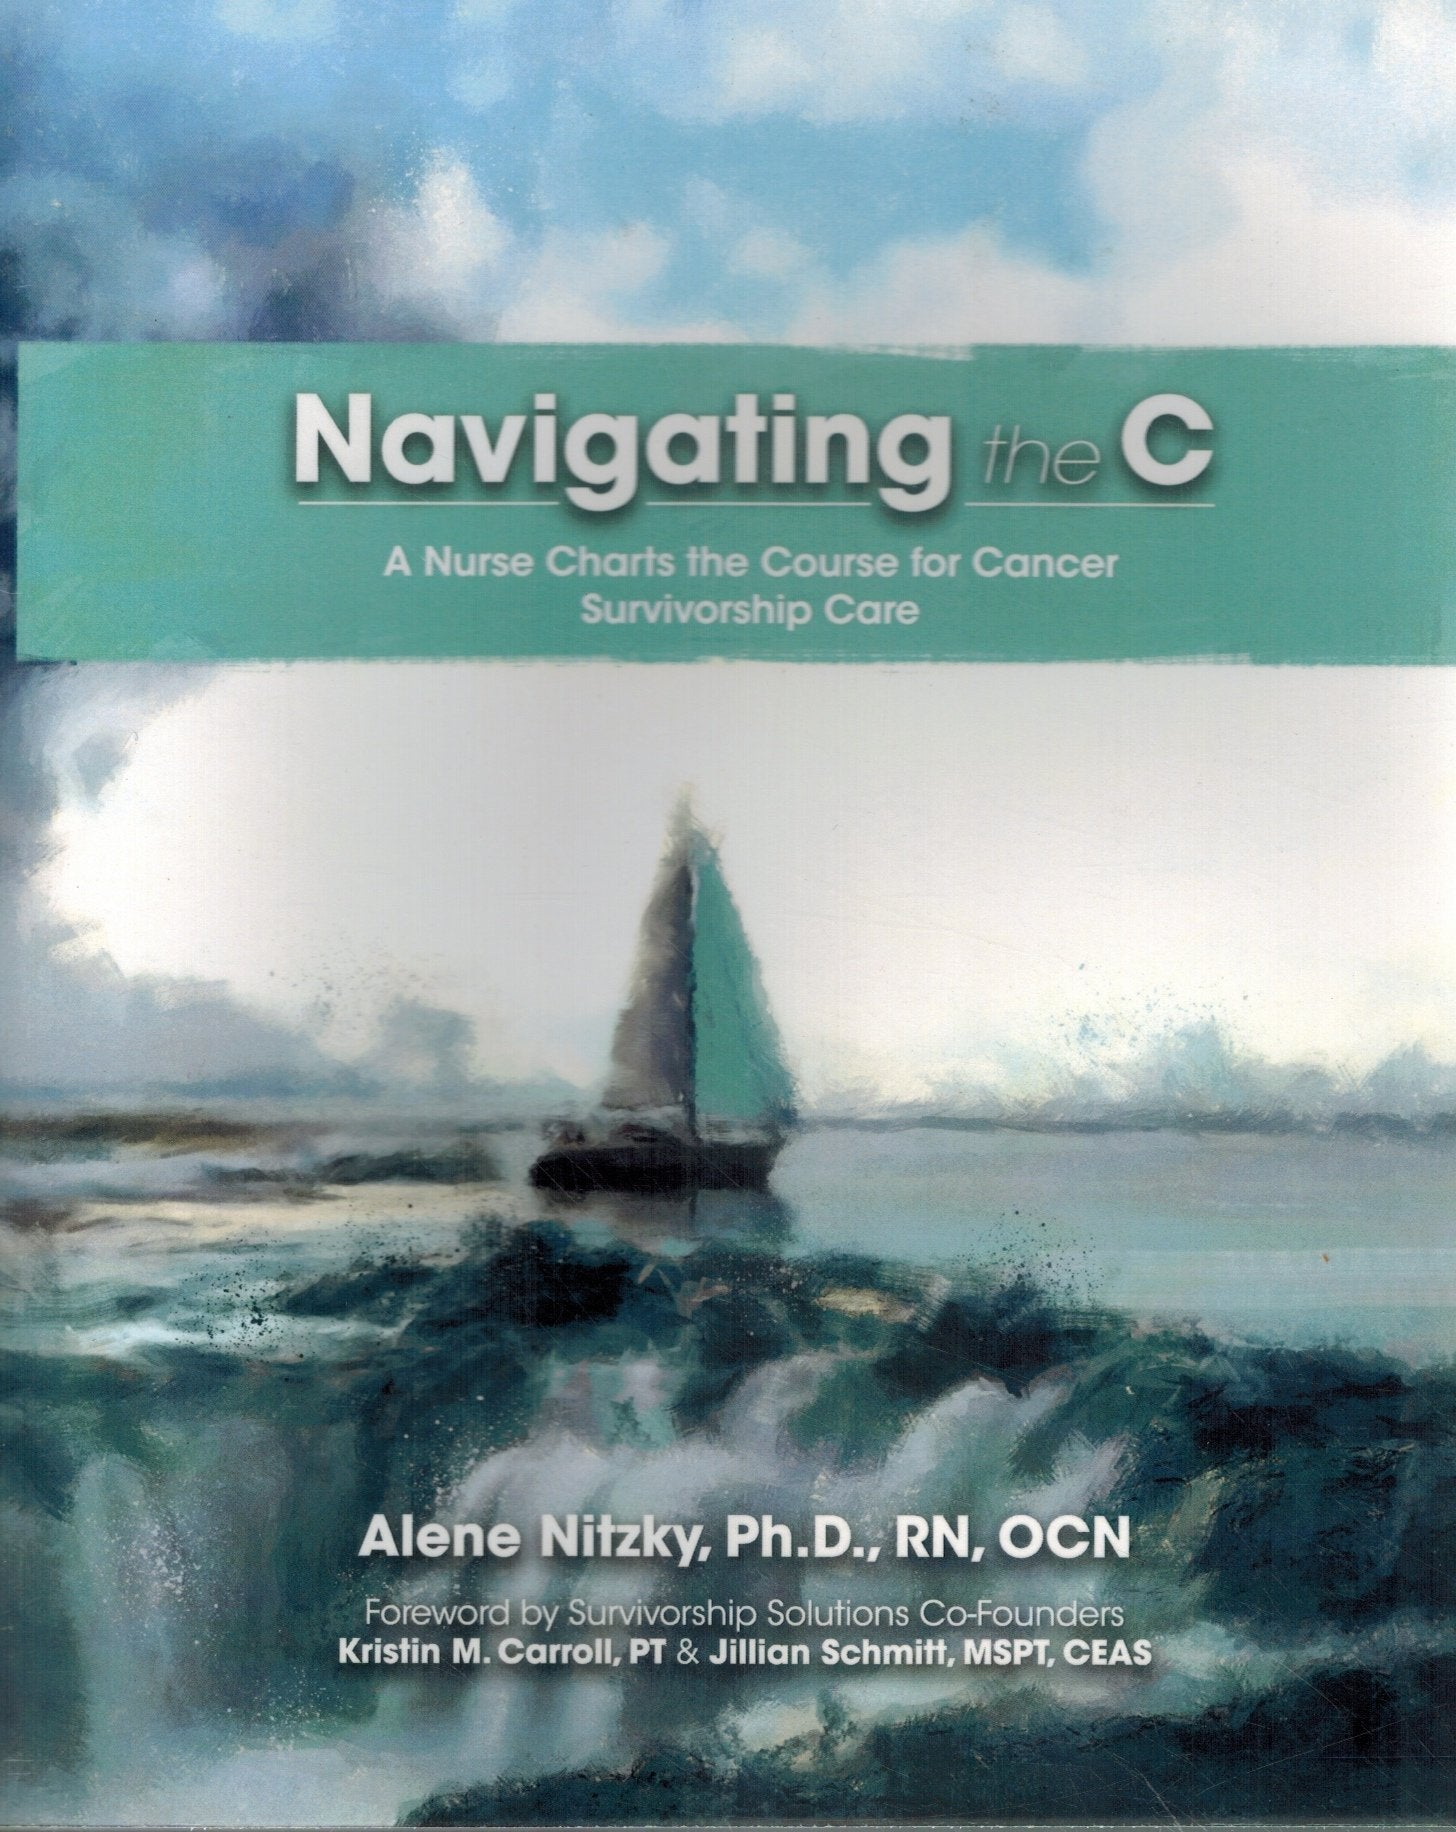 NAVIGATING THE C A Nurse Charts the Course for Cancer Survivorship Care  by Nitzky Ph. D. , Alene